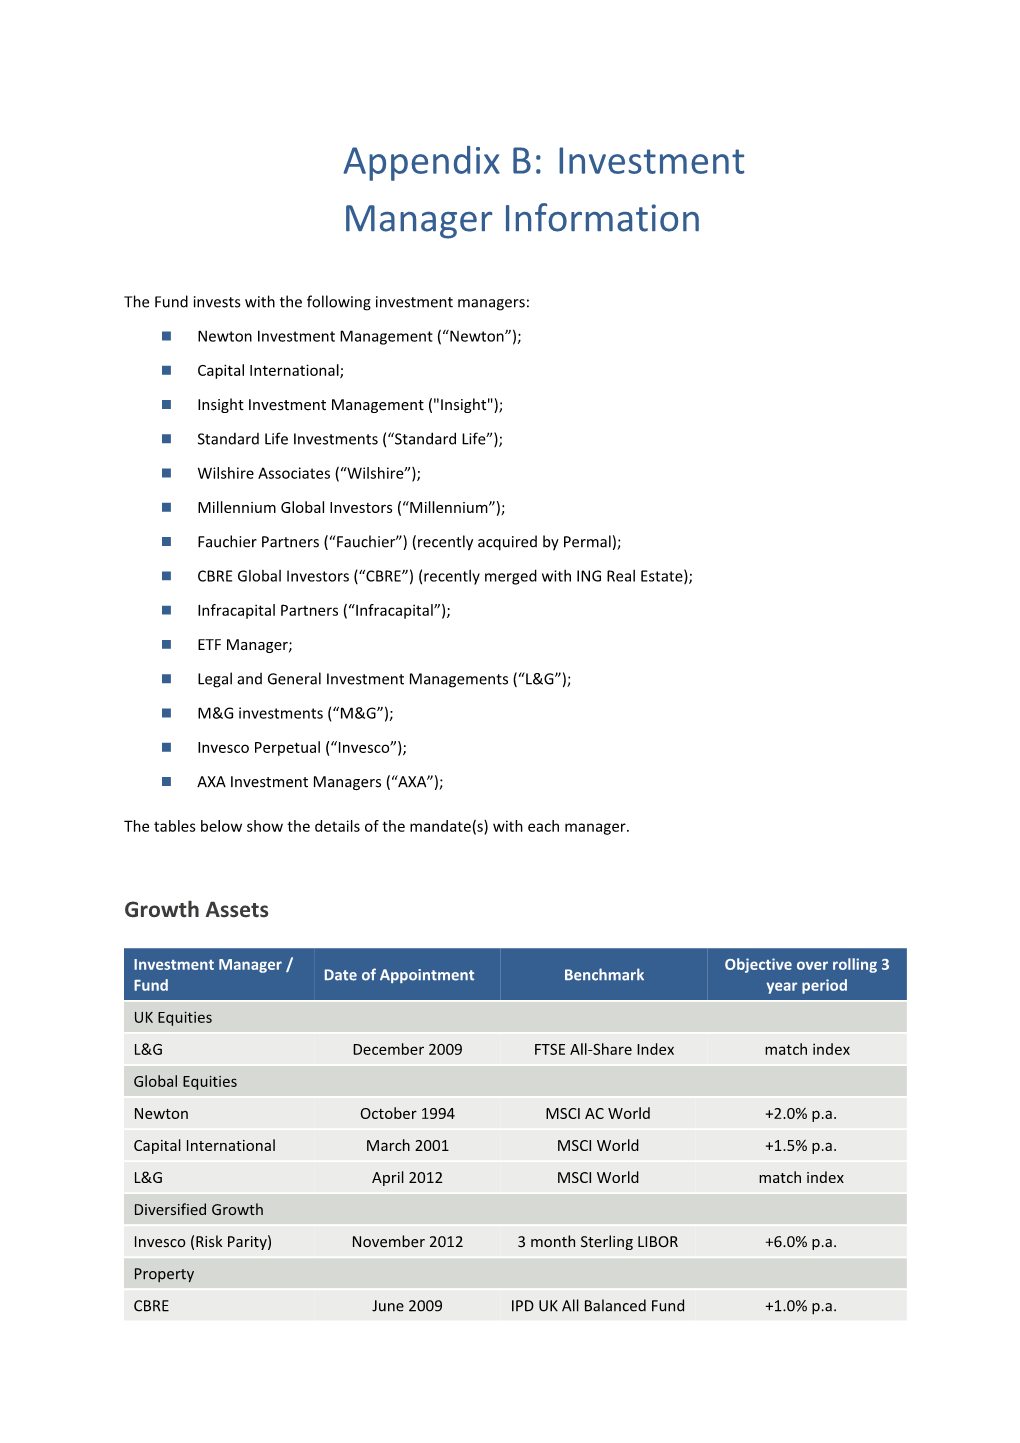 Appendix B:Investment Manager Information